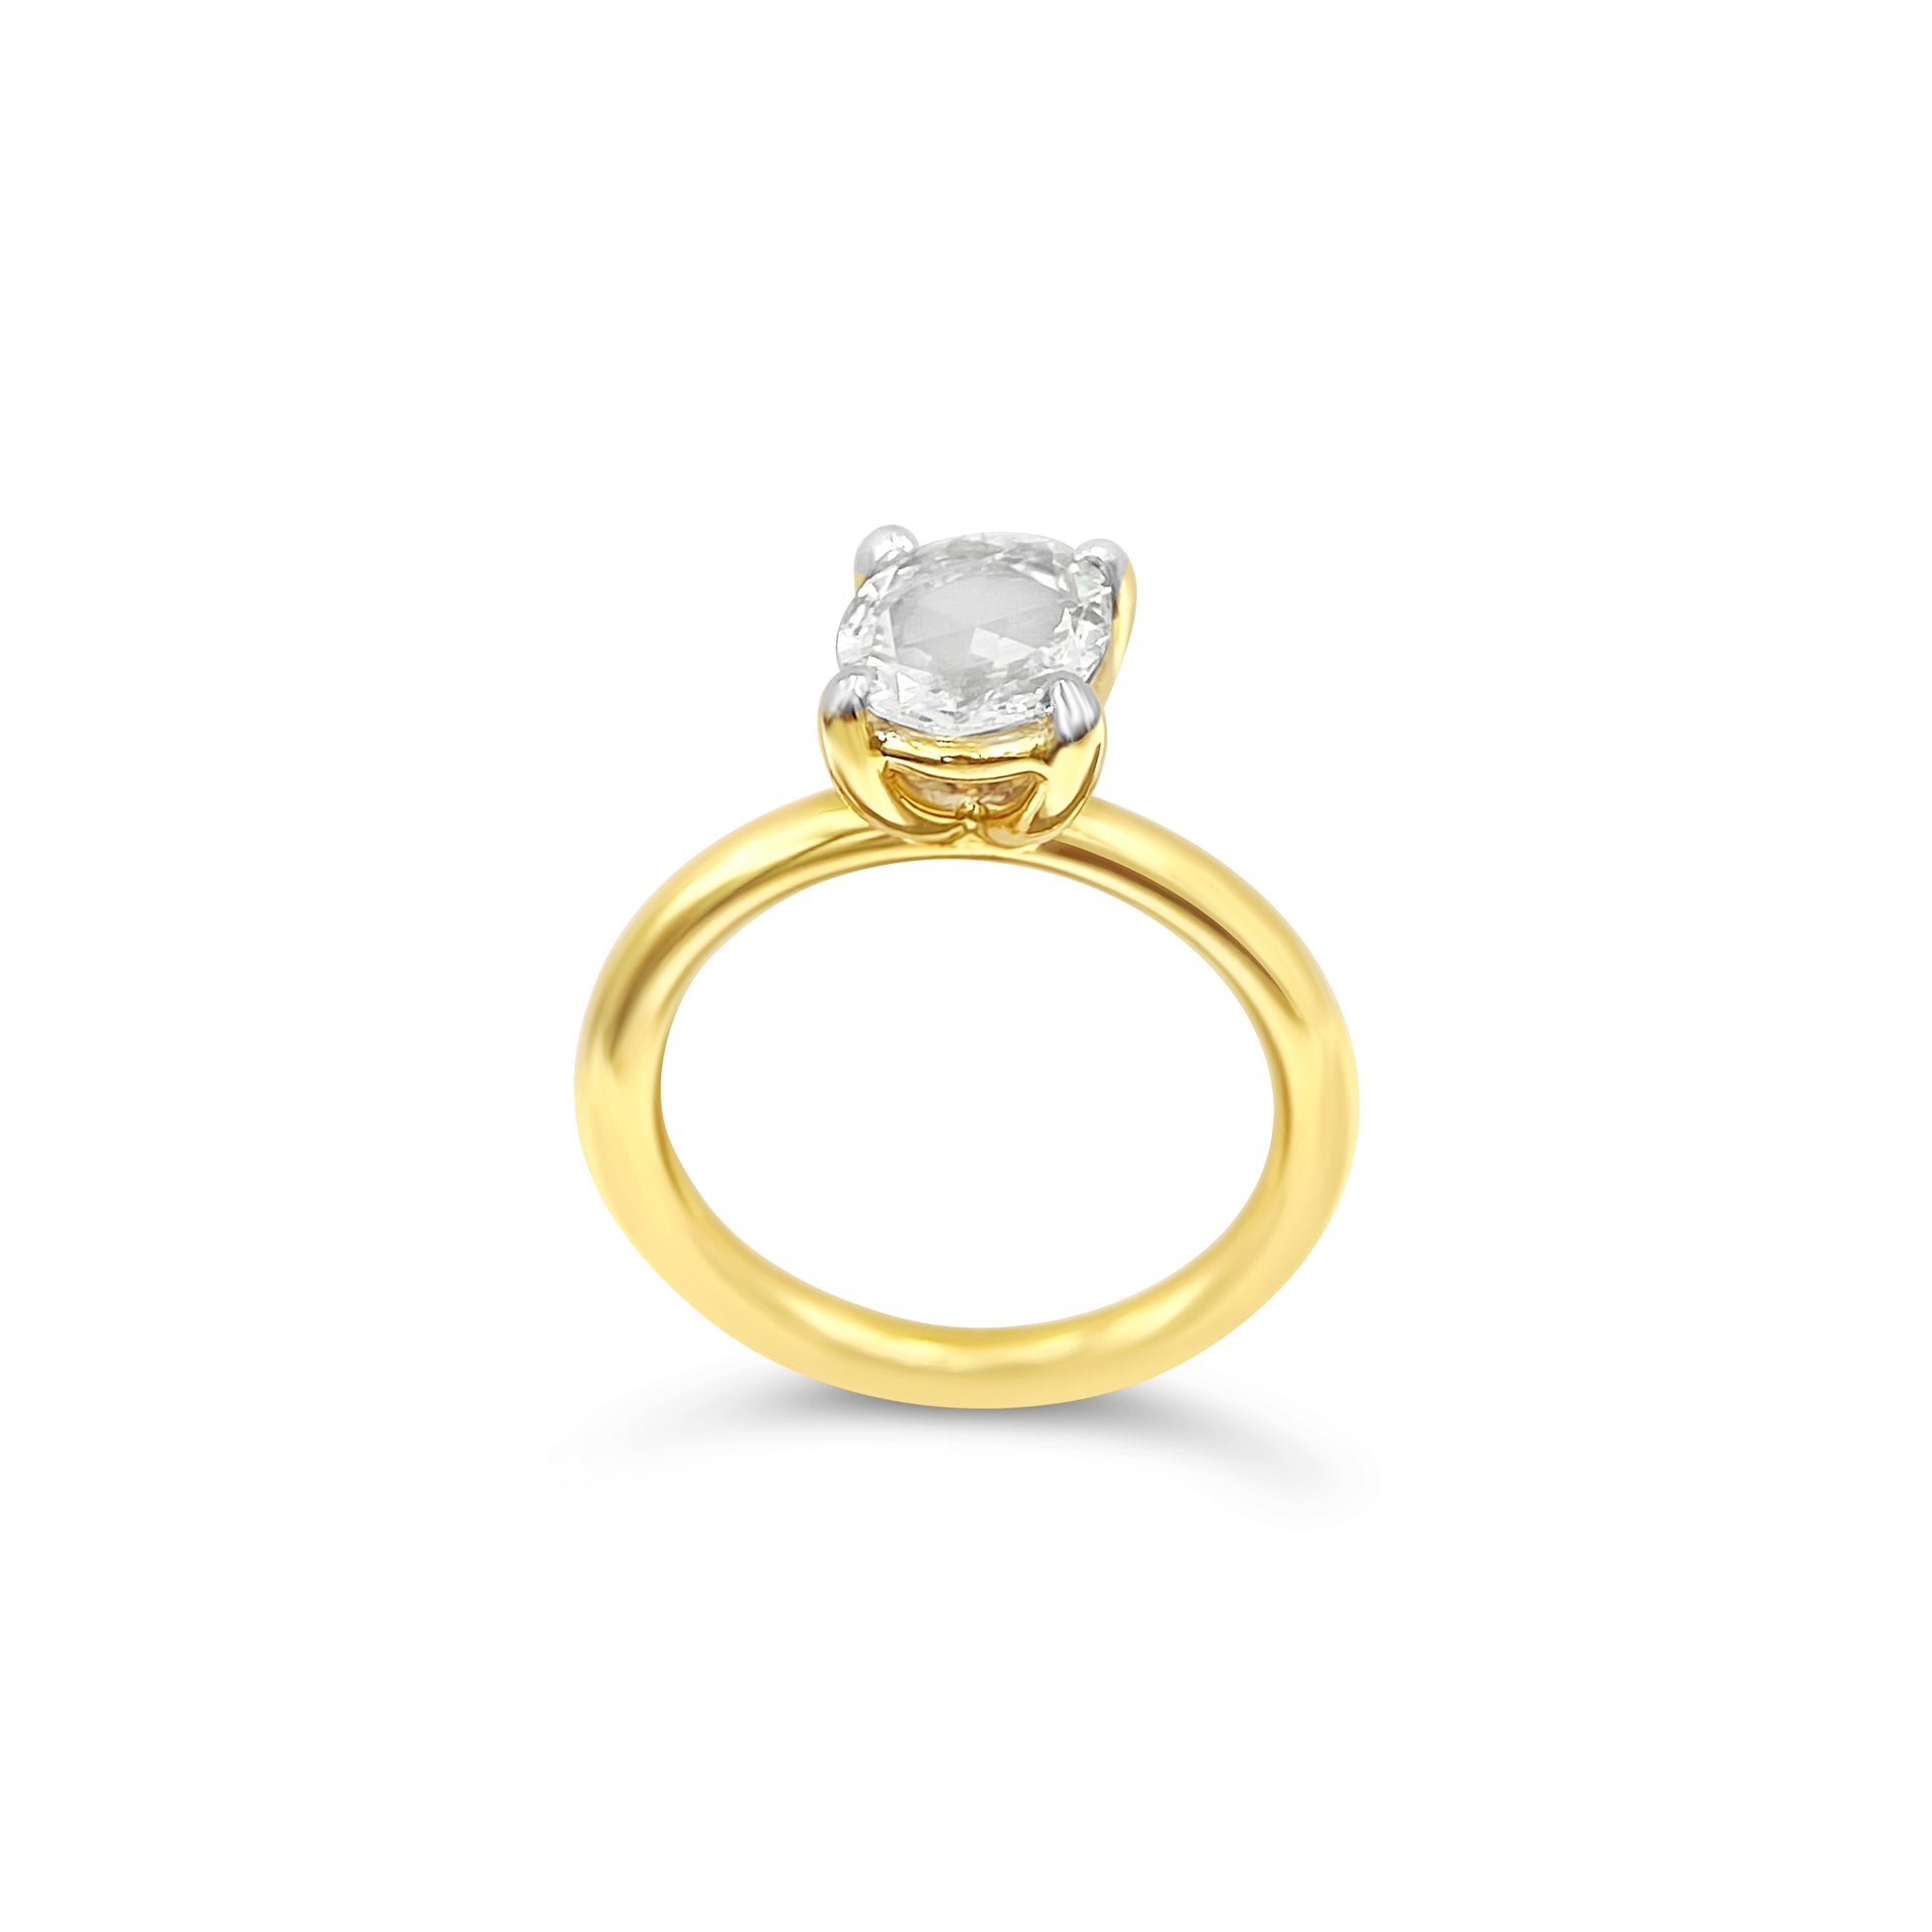 Oval Cut Solitaire Ring with accent prongs- Yellow Gold - Bodega